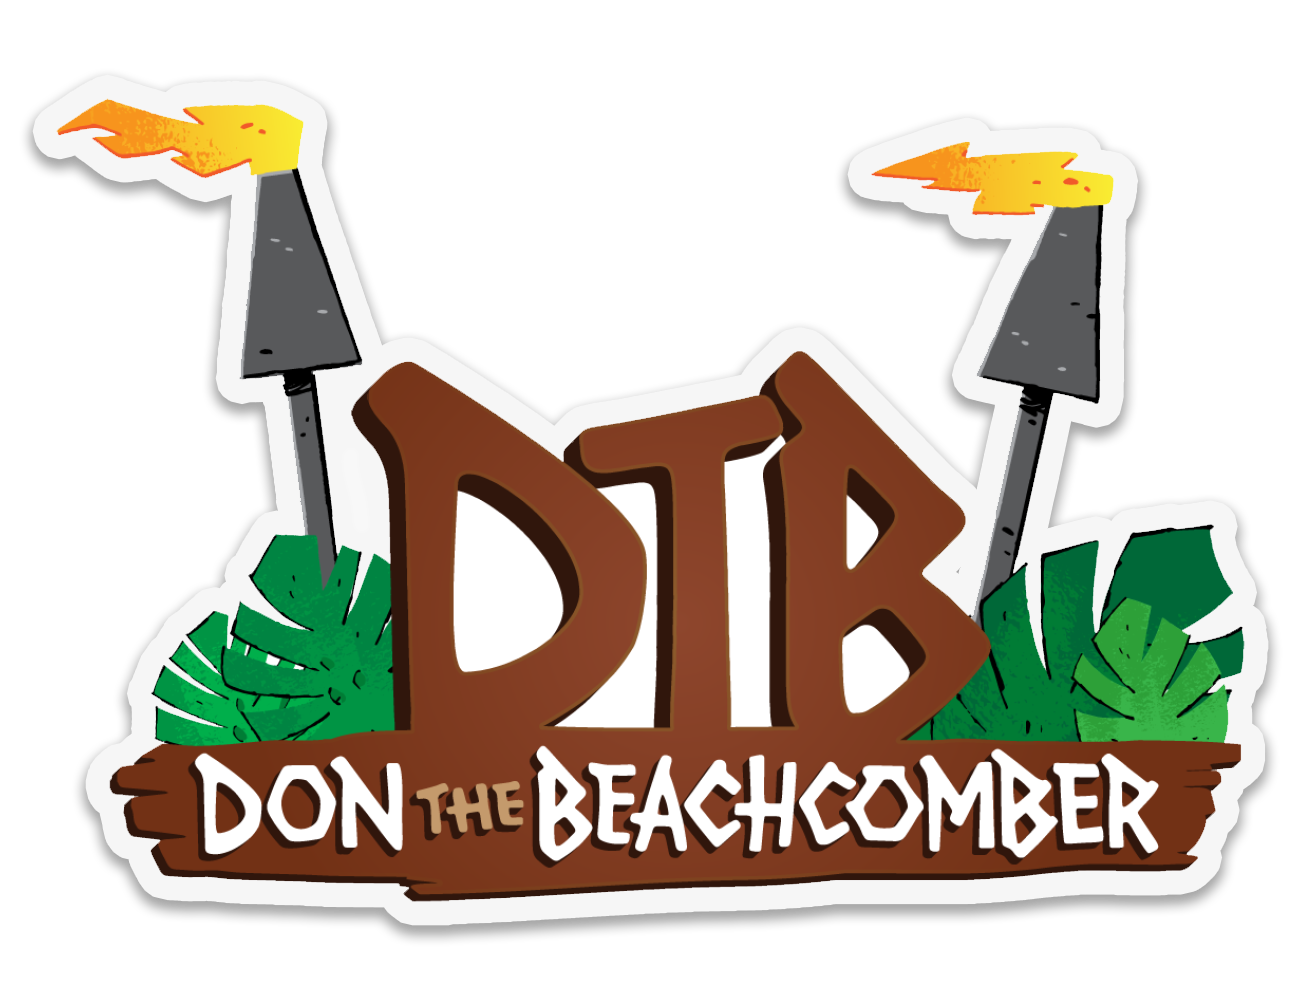 DTB_Sticker_Torches_ee4d4ead-f58d-4350-8e92-29ee84f06166.png